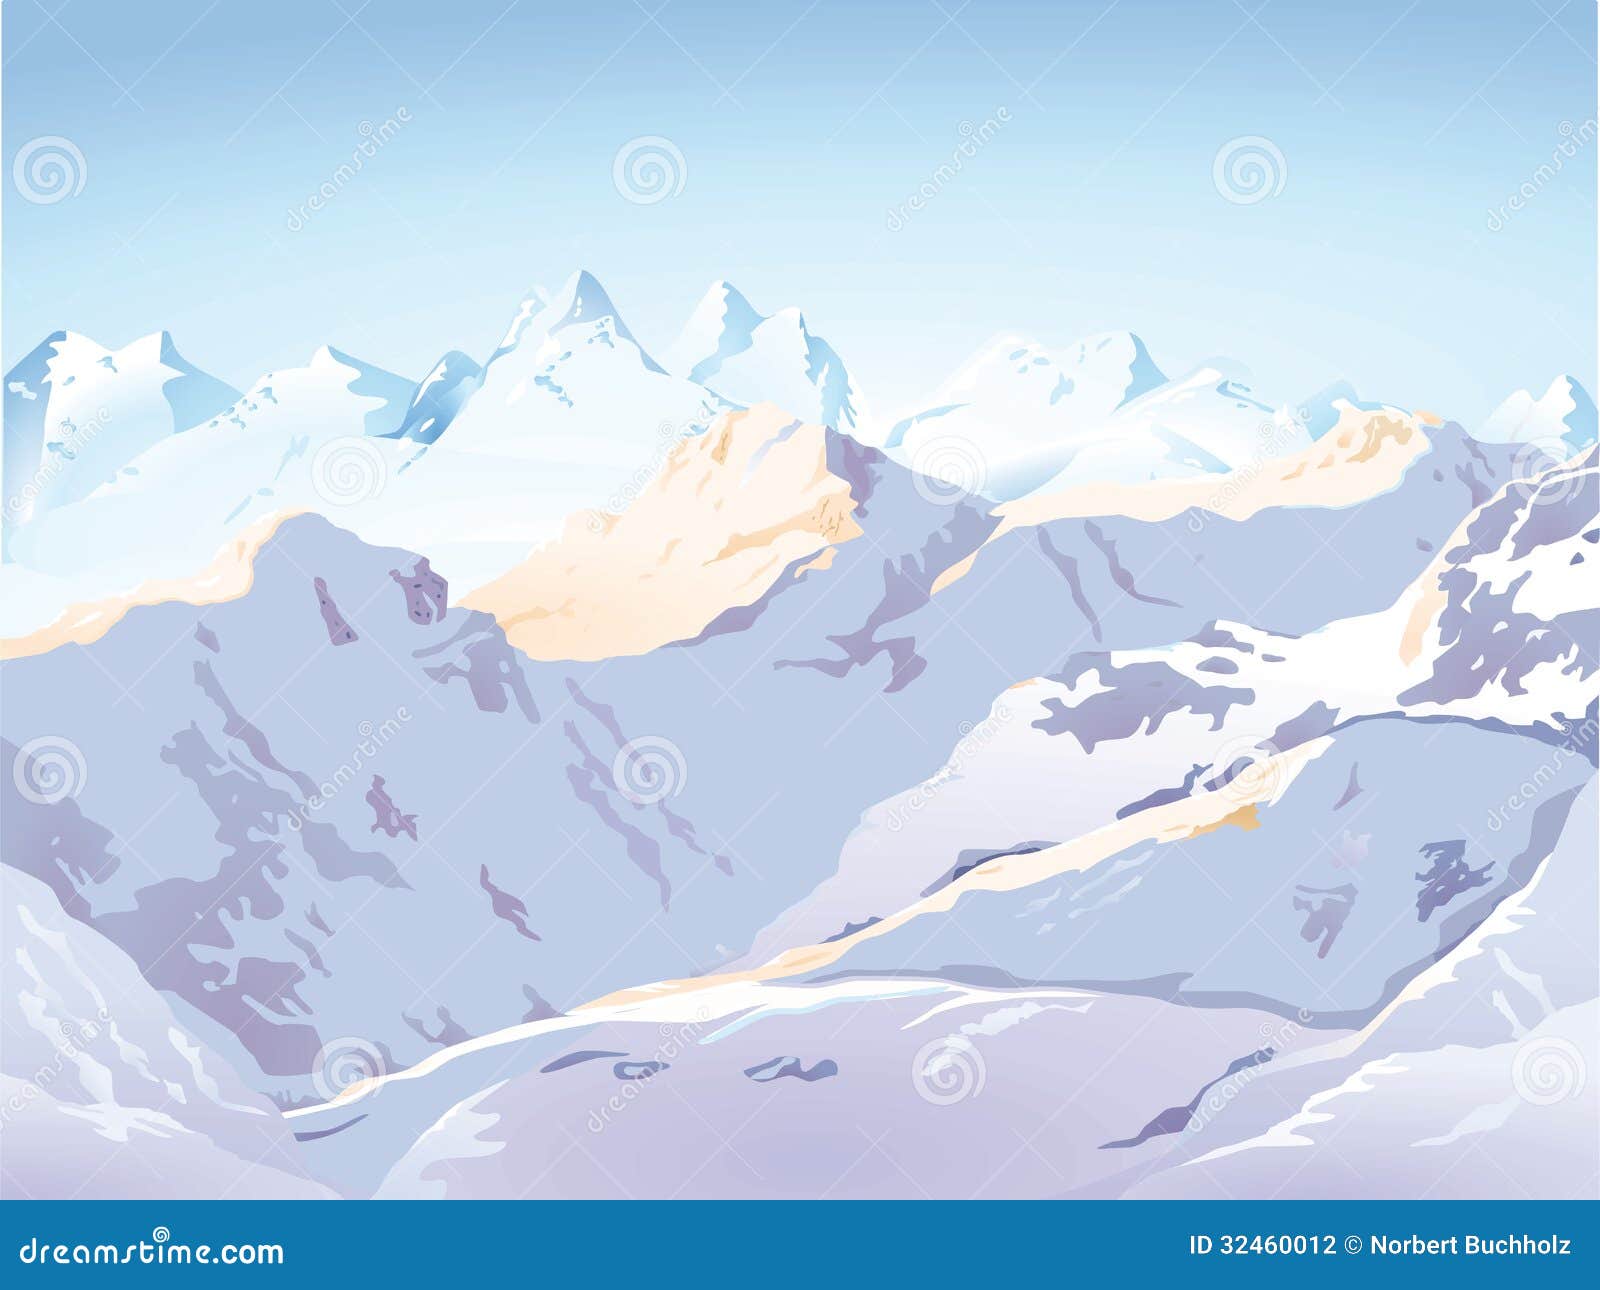 snow capped mountains clipart - photo #30